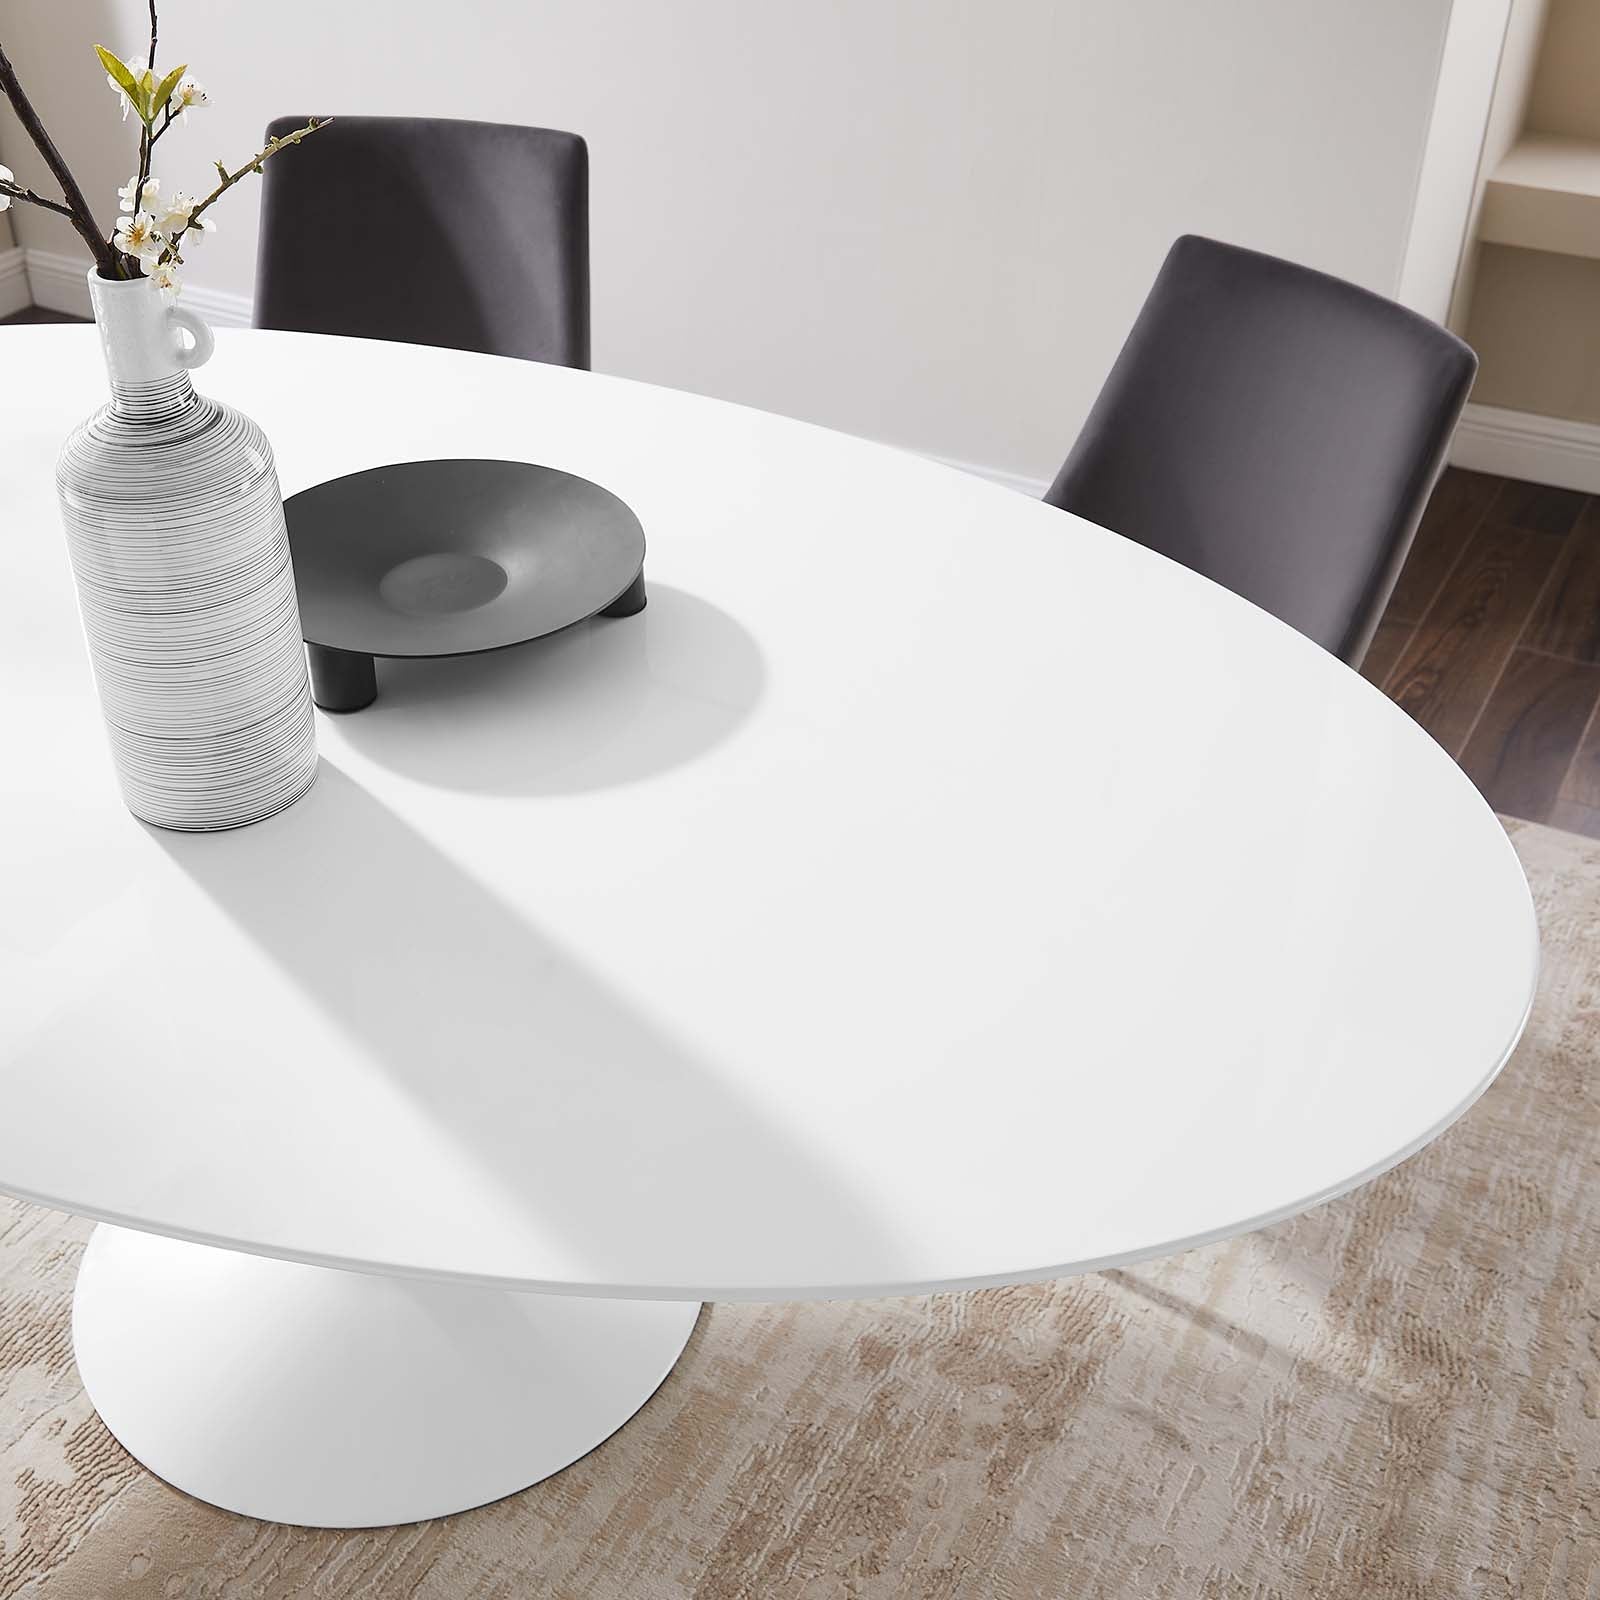 Lippa 78" Oval Wood Top Dining Table - East Shore Modern Home Furnishings